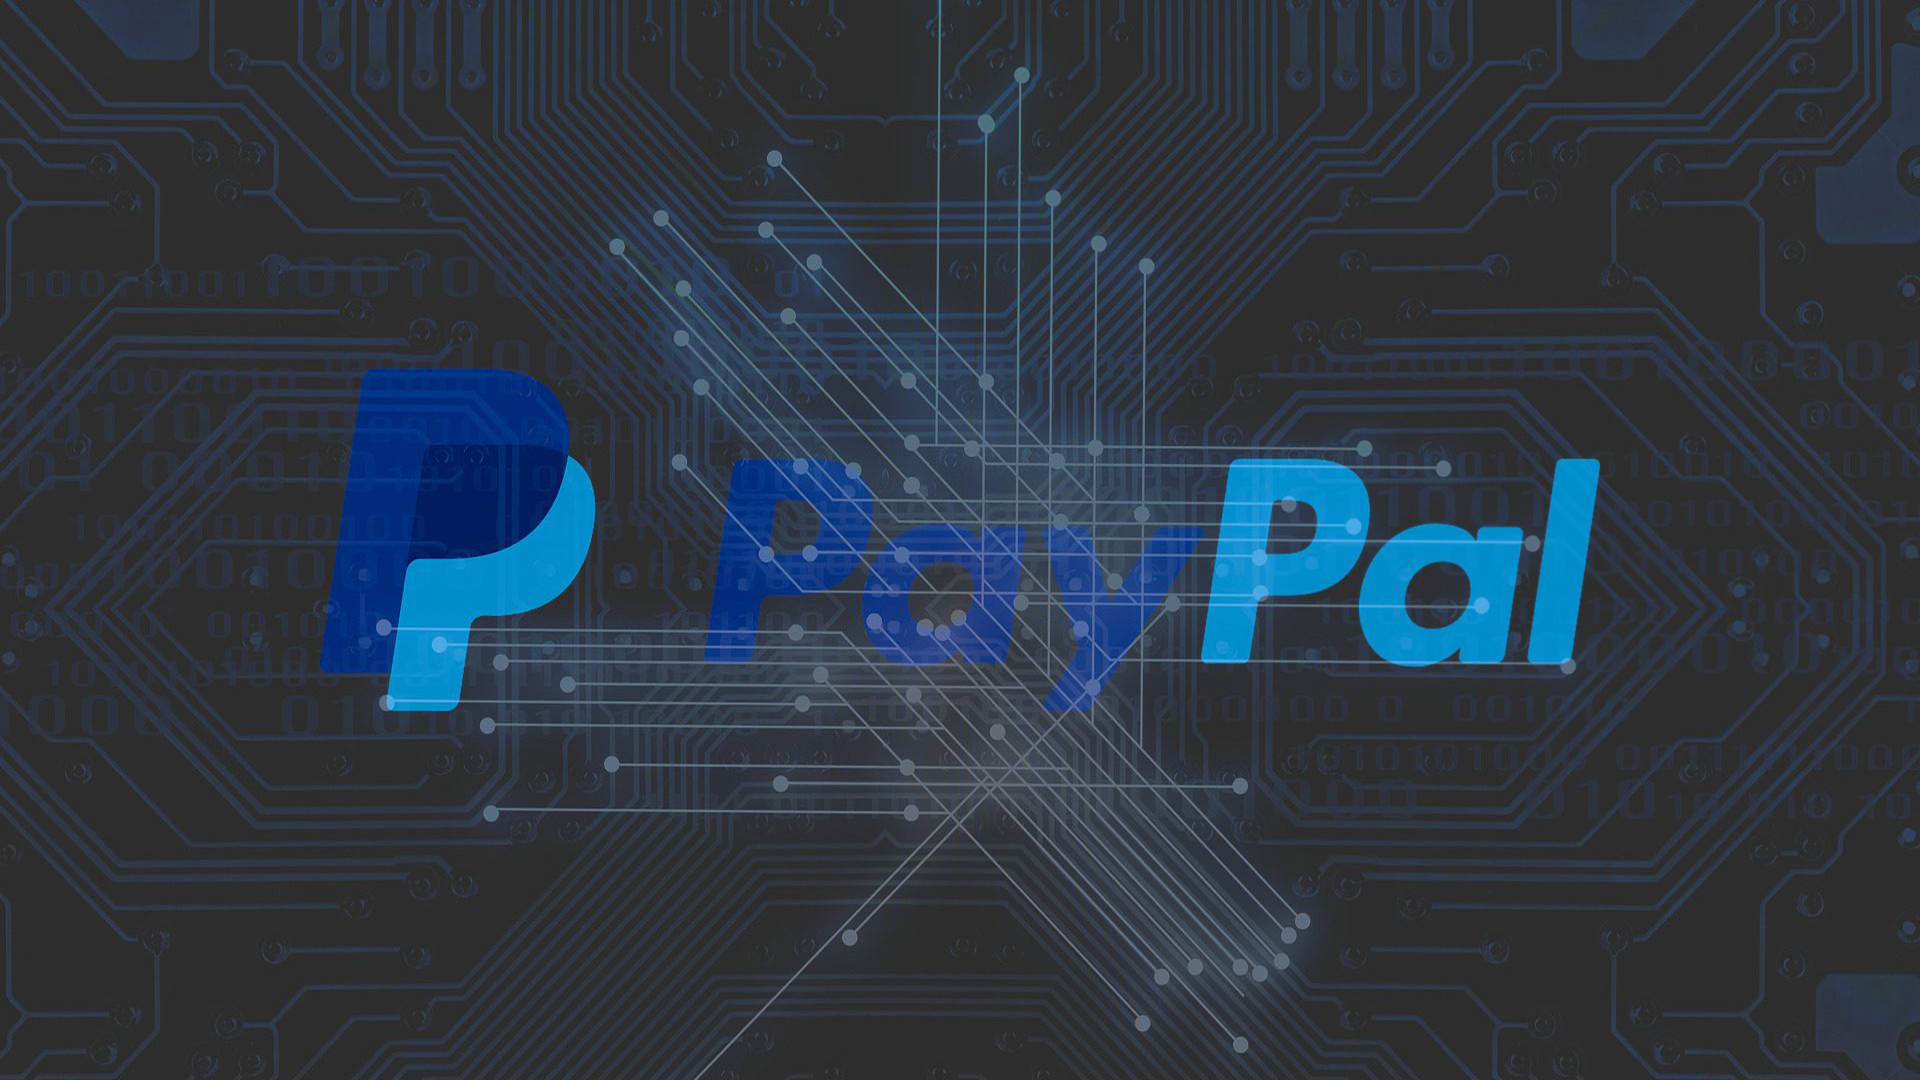 Paypal Logo With Circuitry Background